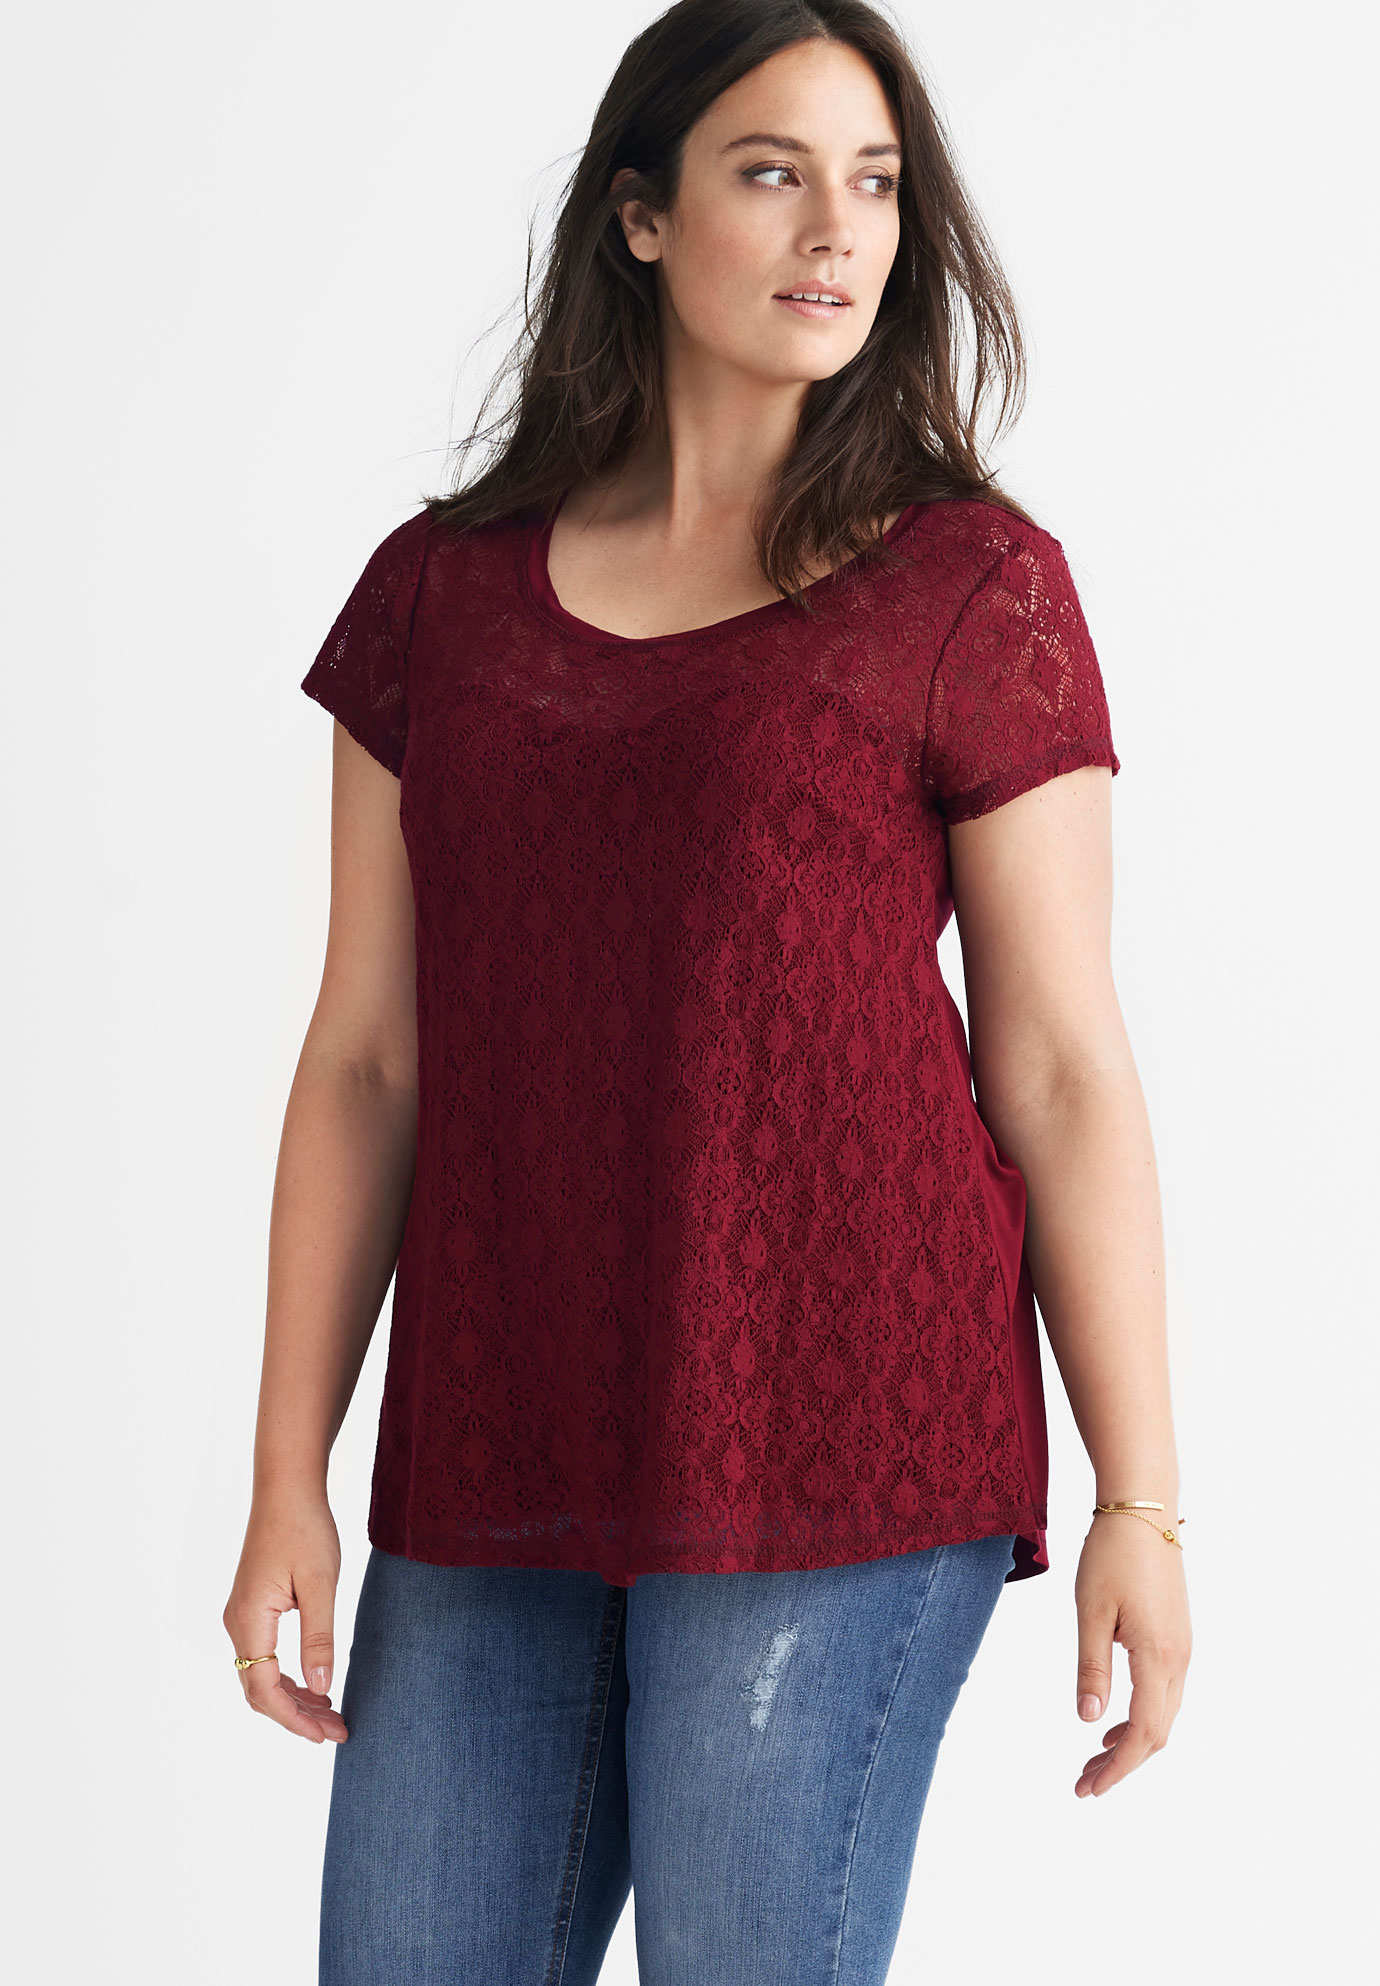 aline lace front knit teeellos® plus size tees